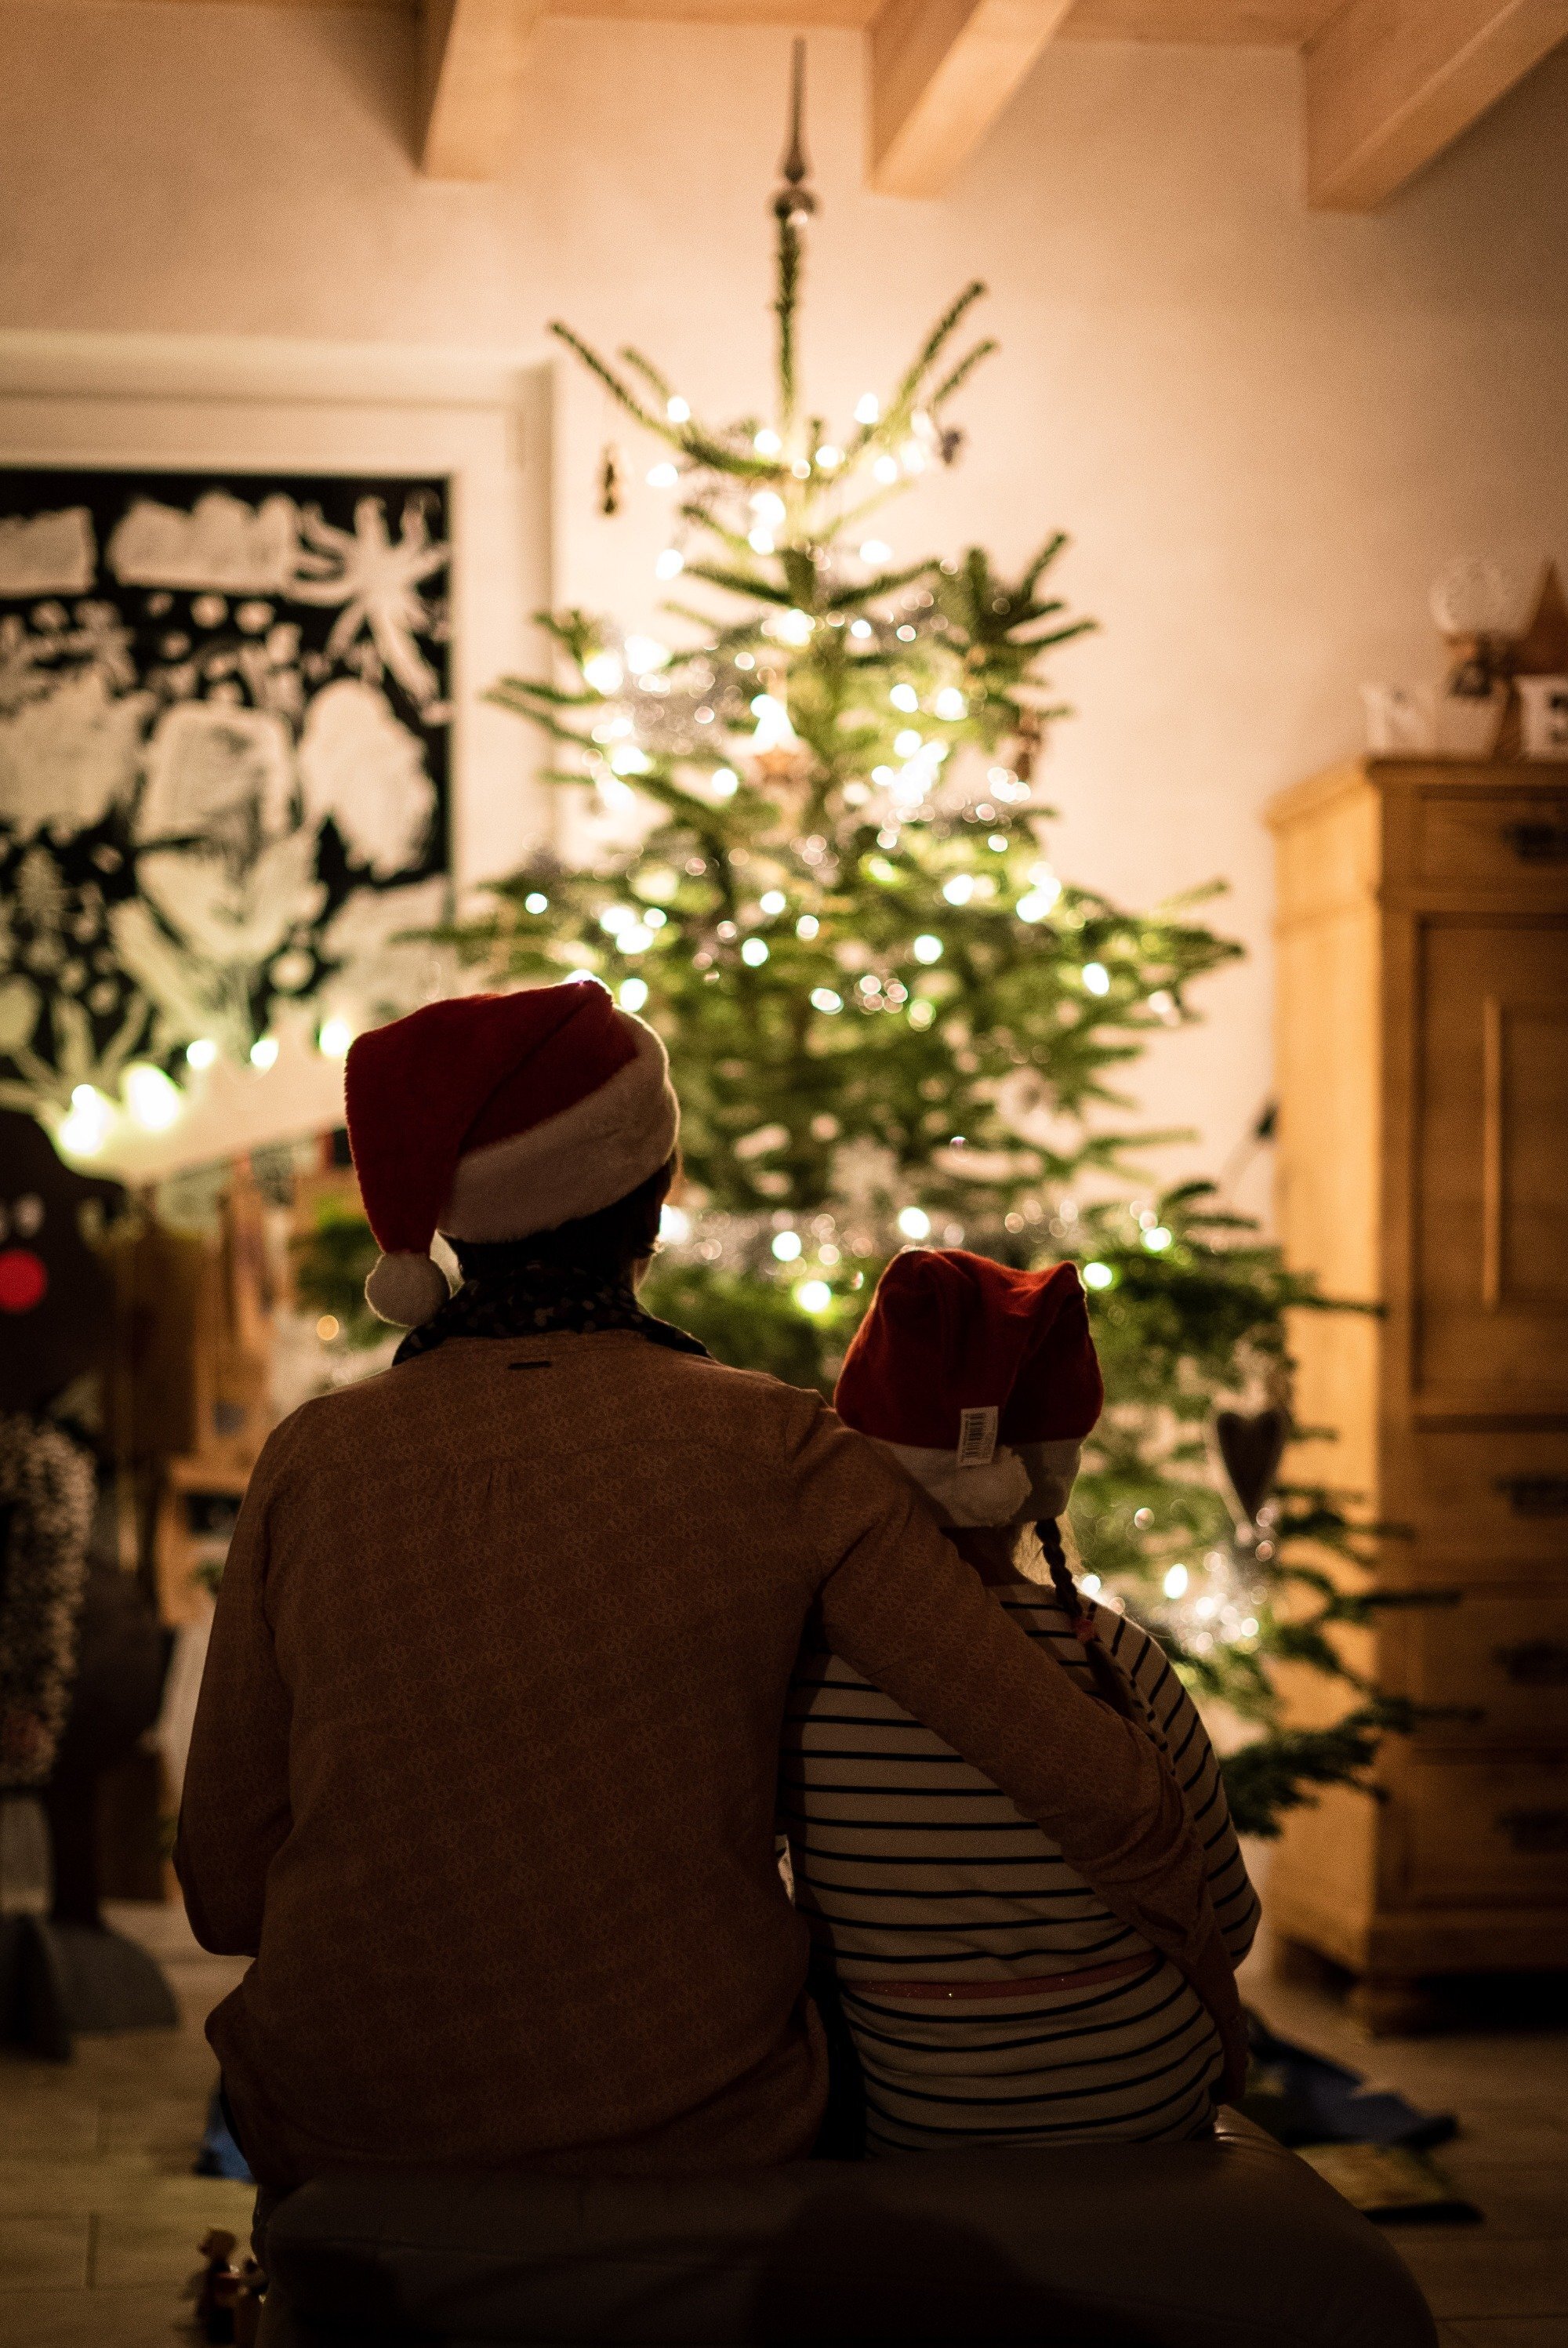 How to Romanticize Christmas With Your Toddler